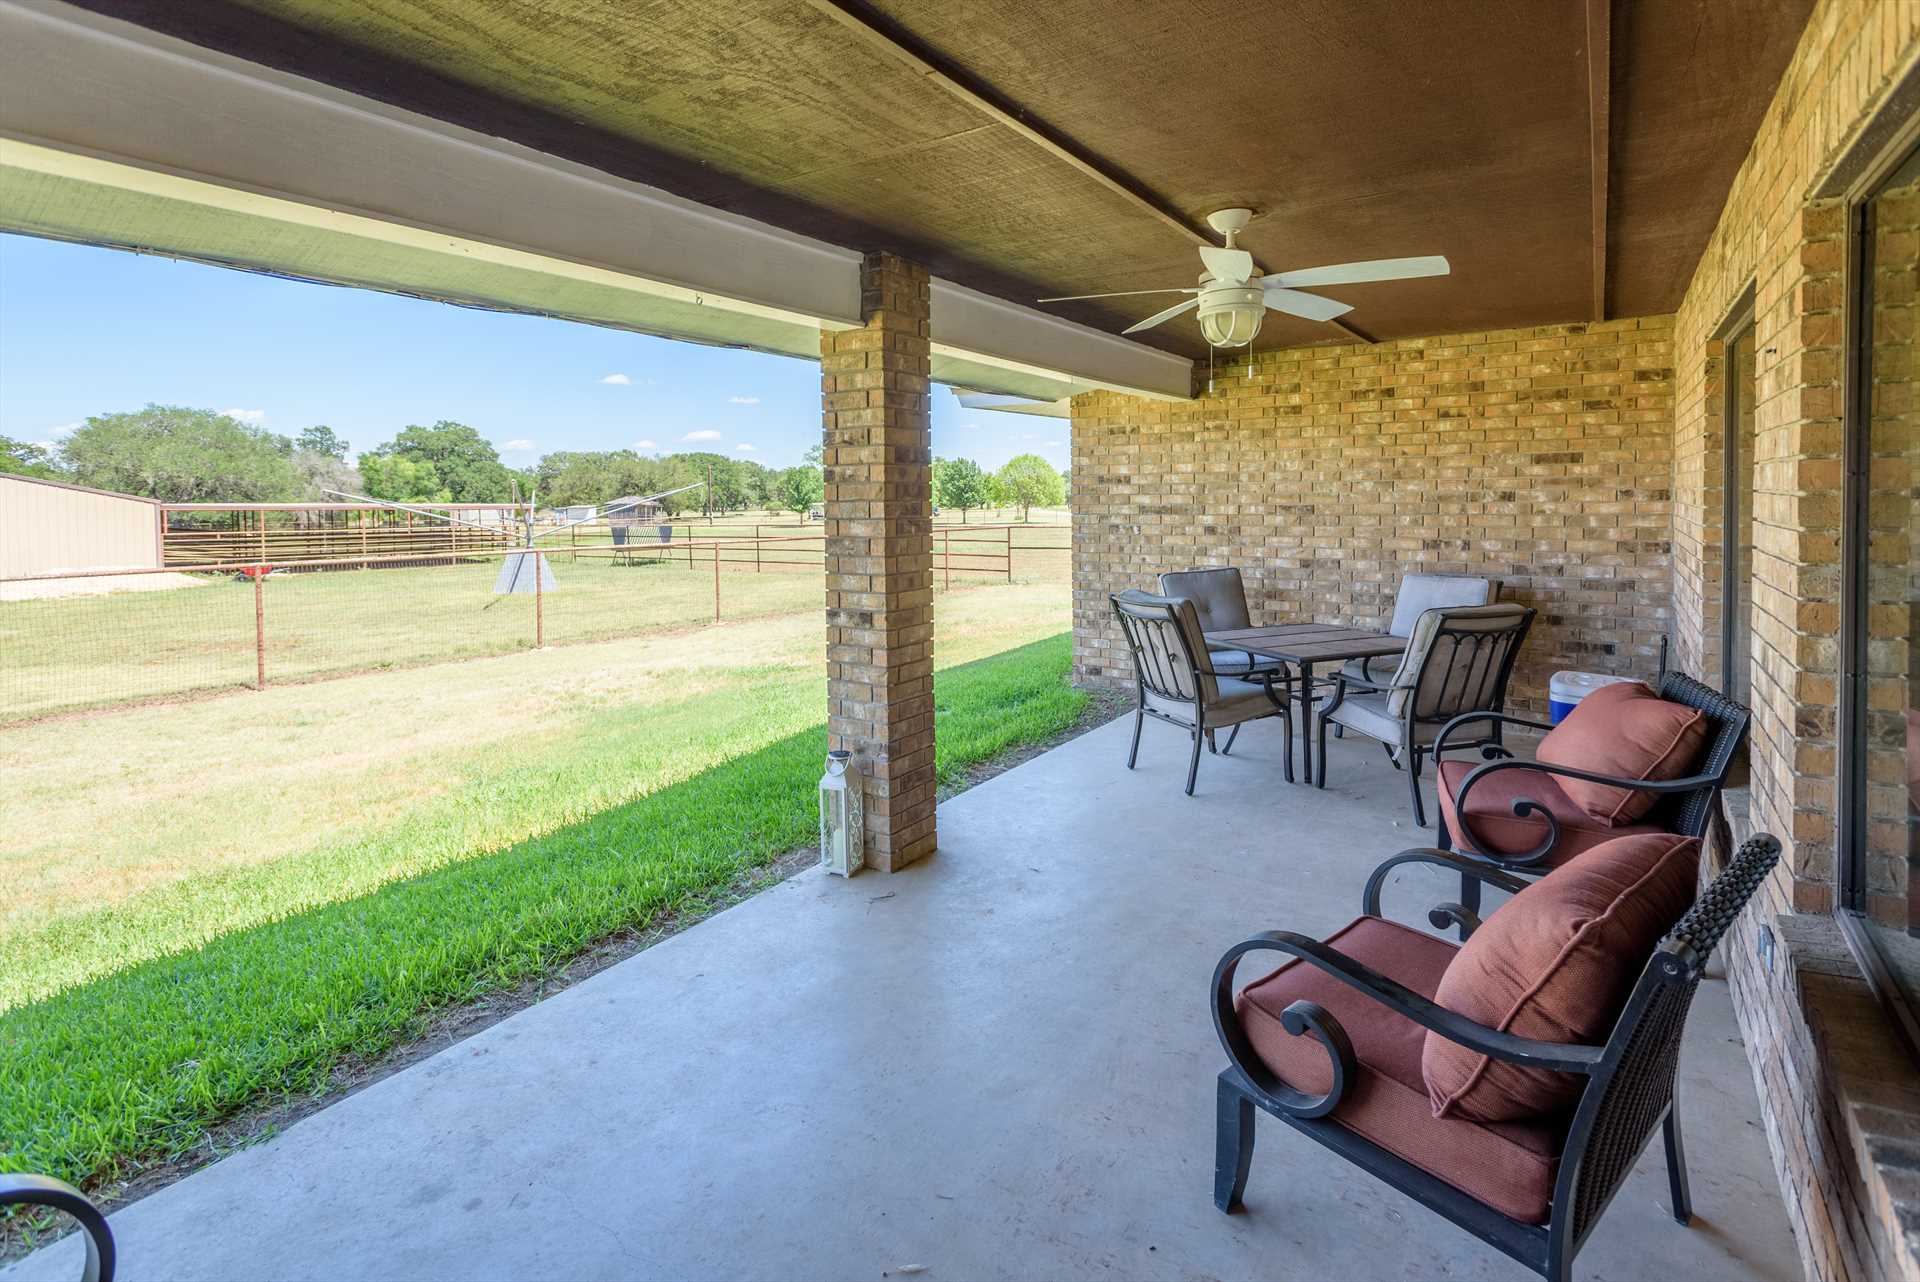                                                 On still days, rustle up some Hill Country breezes of your own with the patio's ceiling fan.